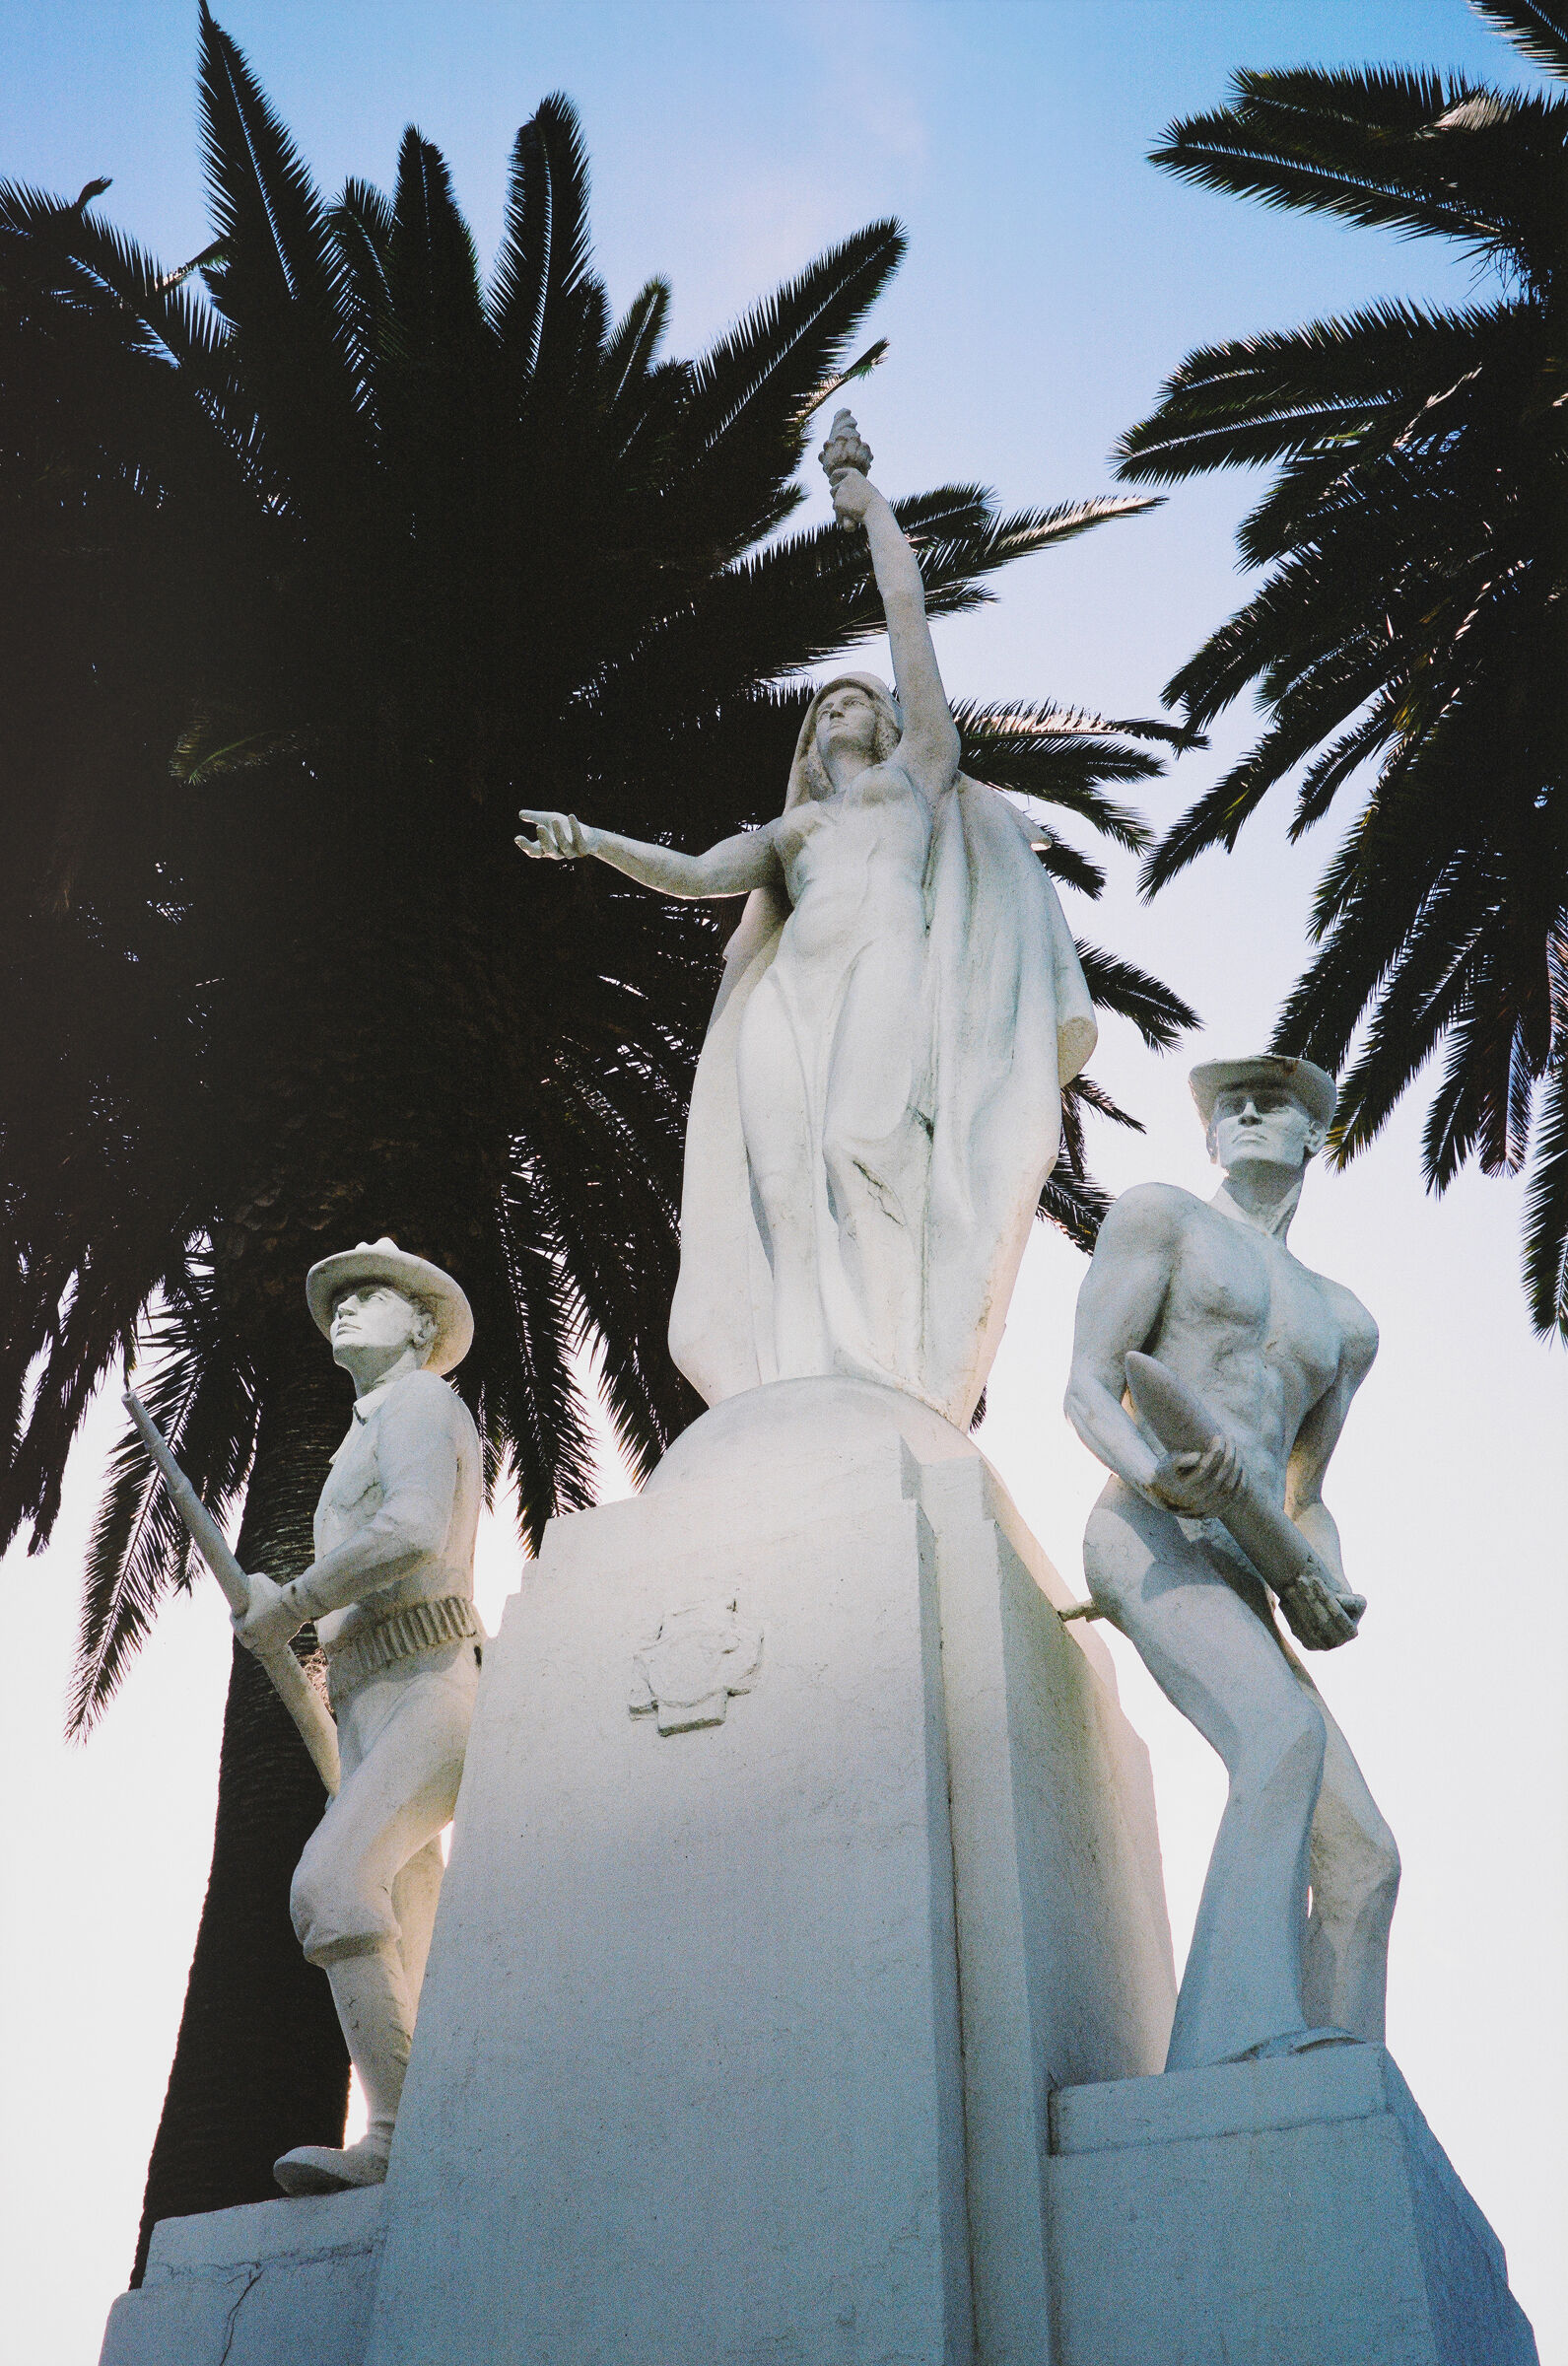 A photograph of three white sculptures of people taken from below with palm trees in the background.